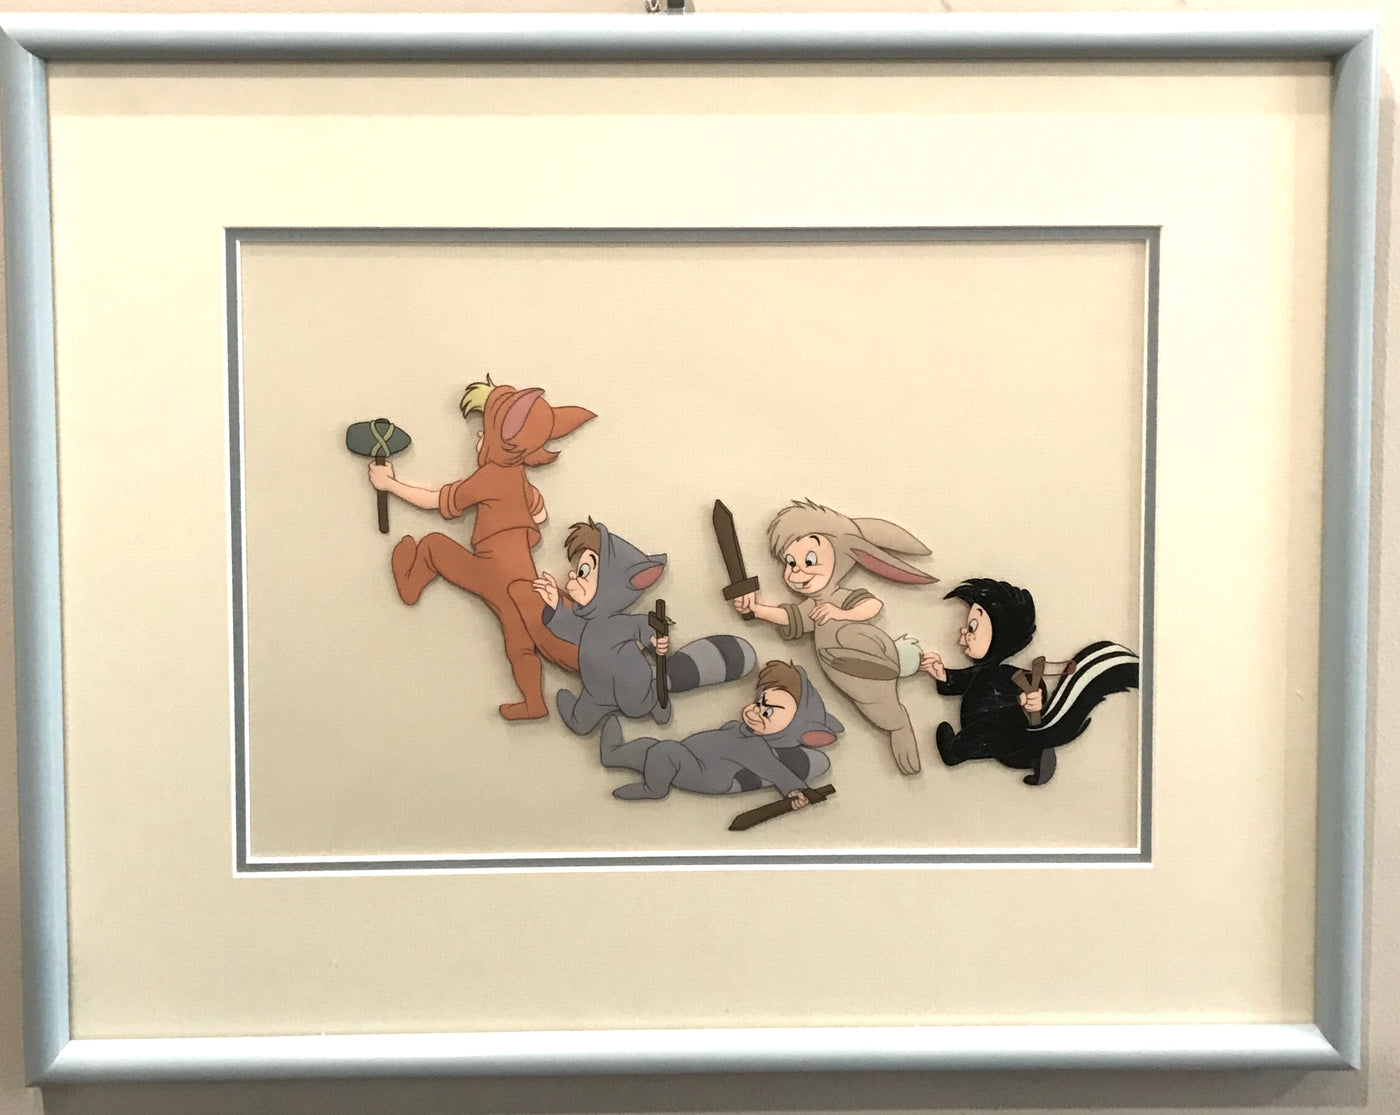 Original Walt Disney Production Cel from Peter Pan featuring the Lost Boys